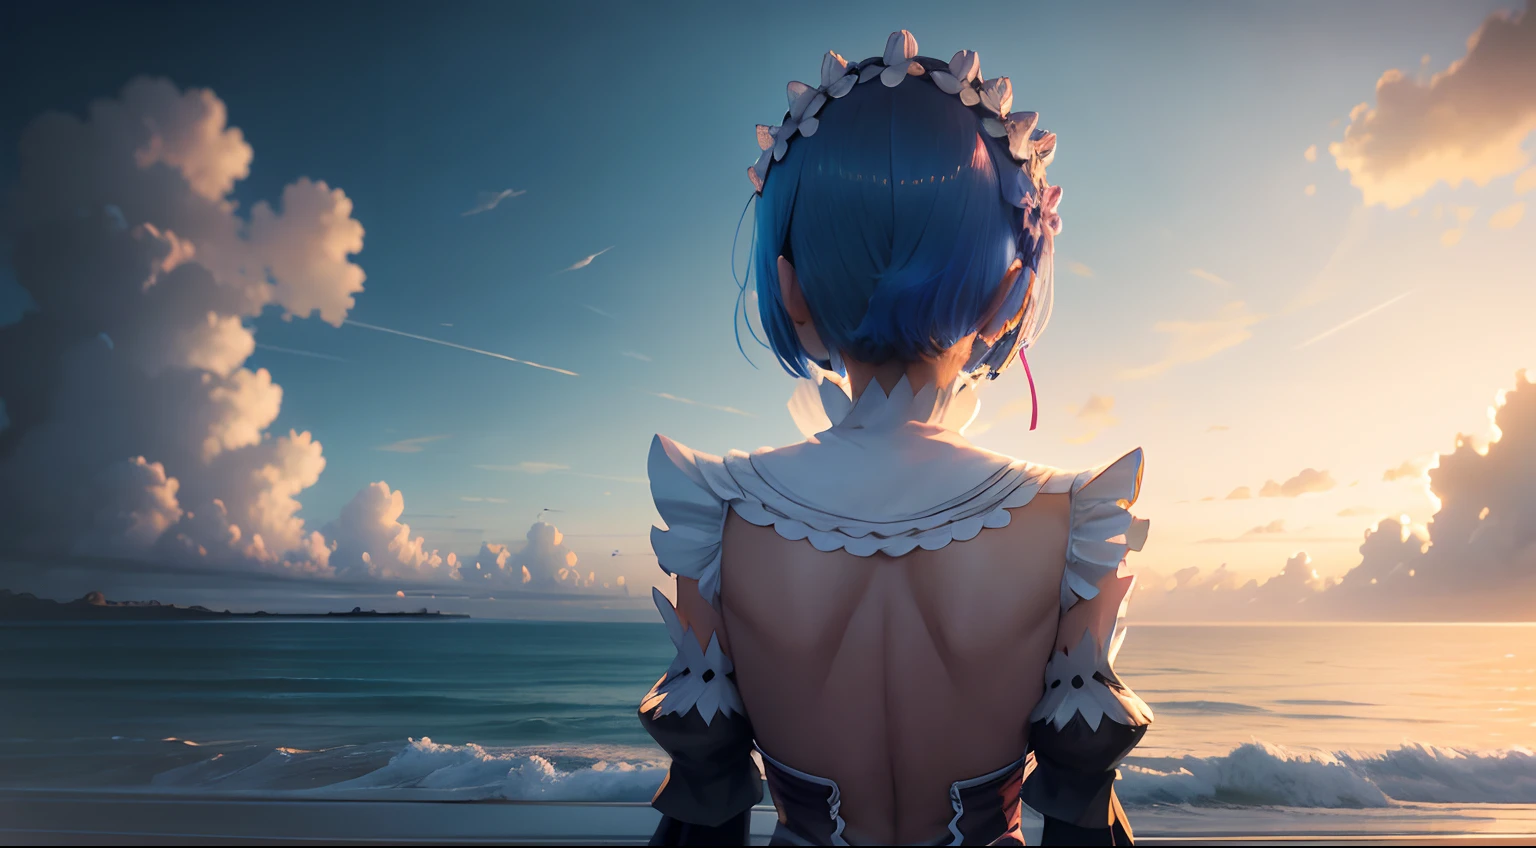 master part, ultra details, ((Rem from ReZero)), Proportionate Body, Naked, sitting down, Ass, raining, Storm clouds, vignette, wooden dock, mar, looking away from the viewer, cinematic, dark surroundings, eyeshadows, sharp contrast, (view from behind), field of view, silhouette